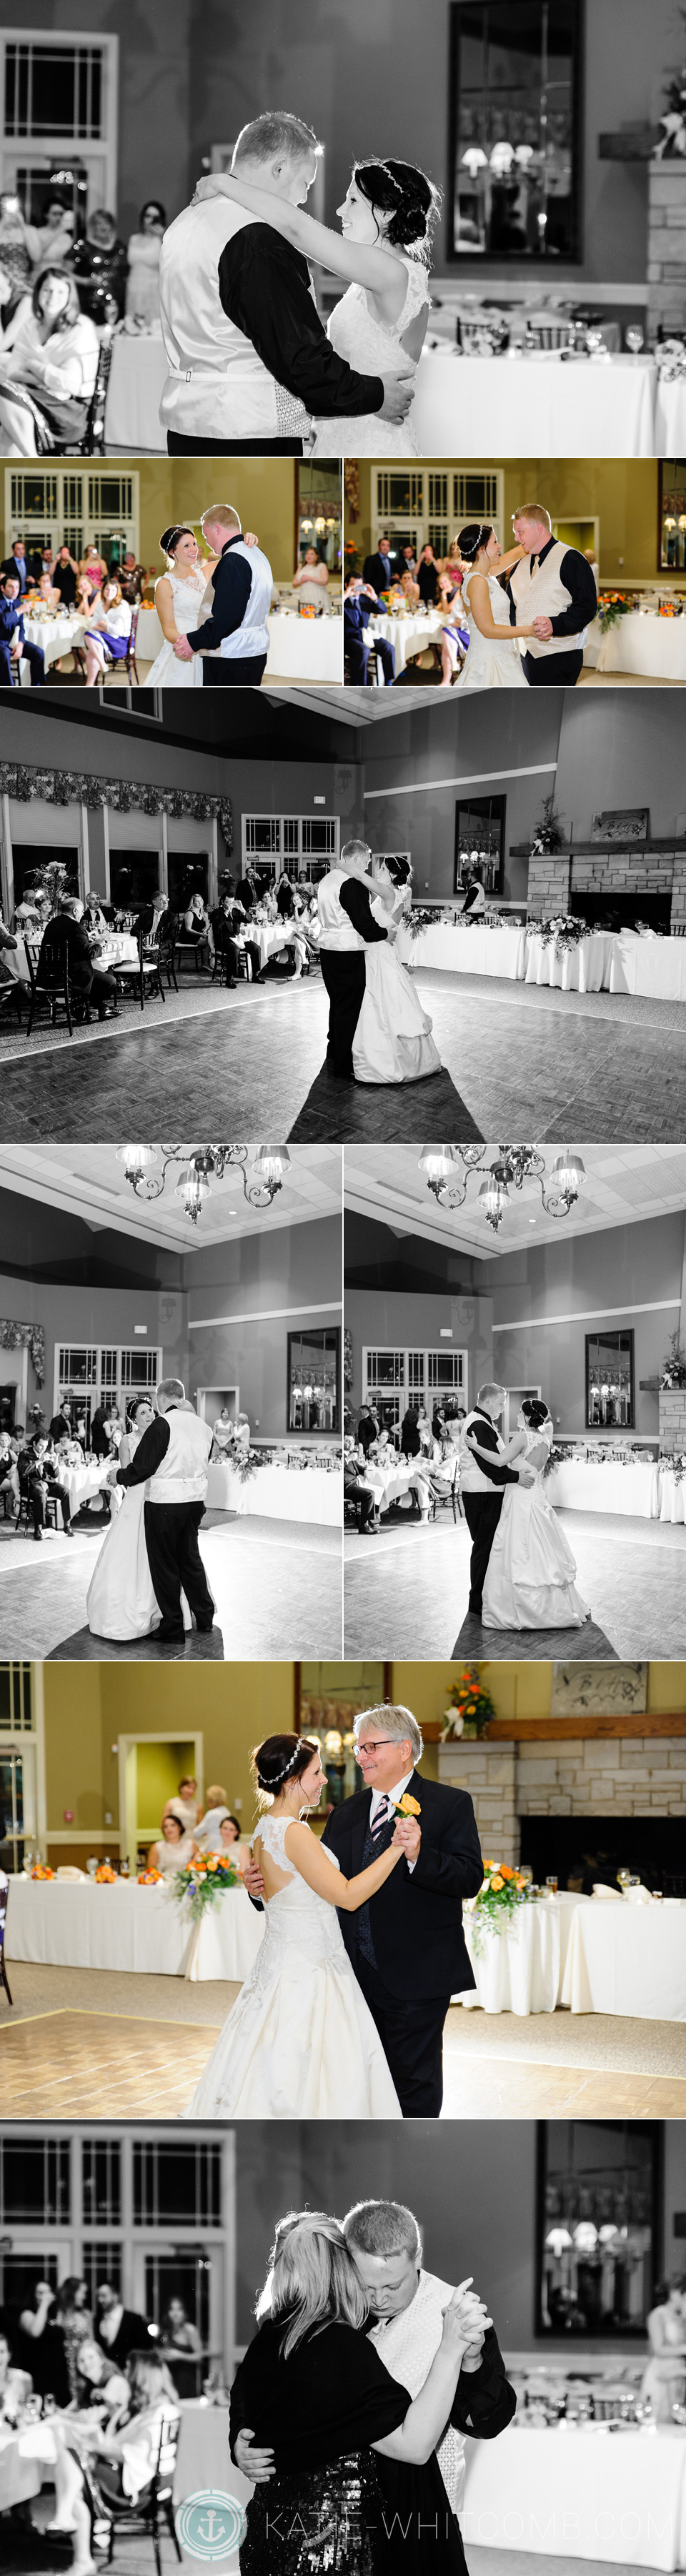 Bride & Groom's first dances at their wedding reception at South Bend Country Club